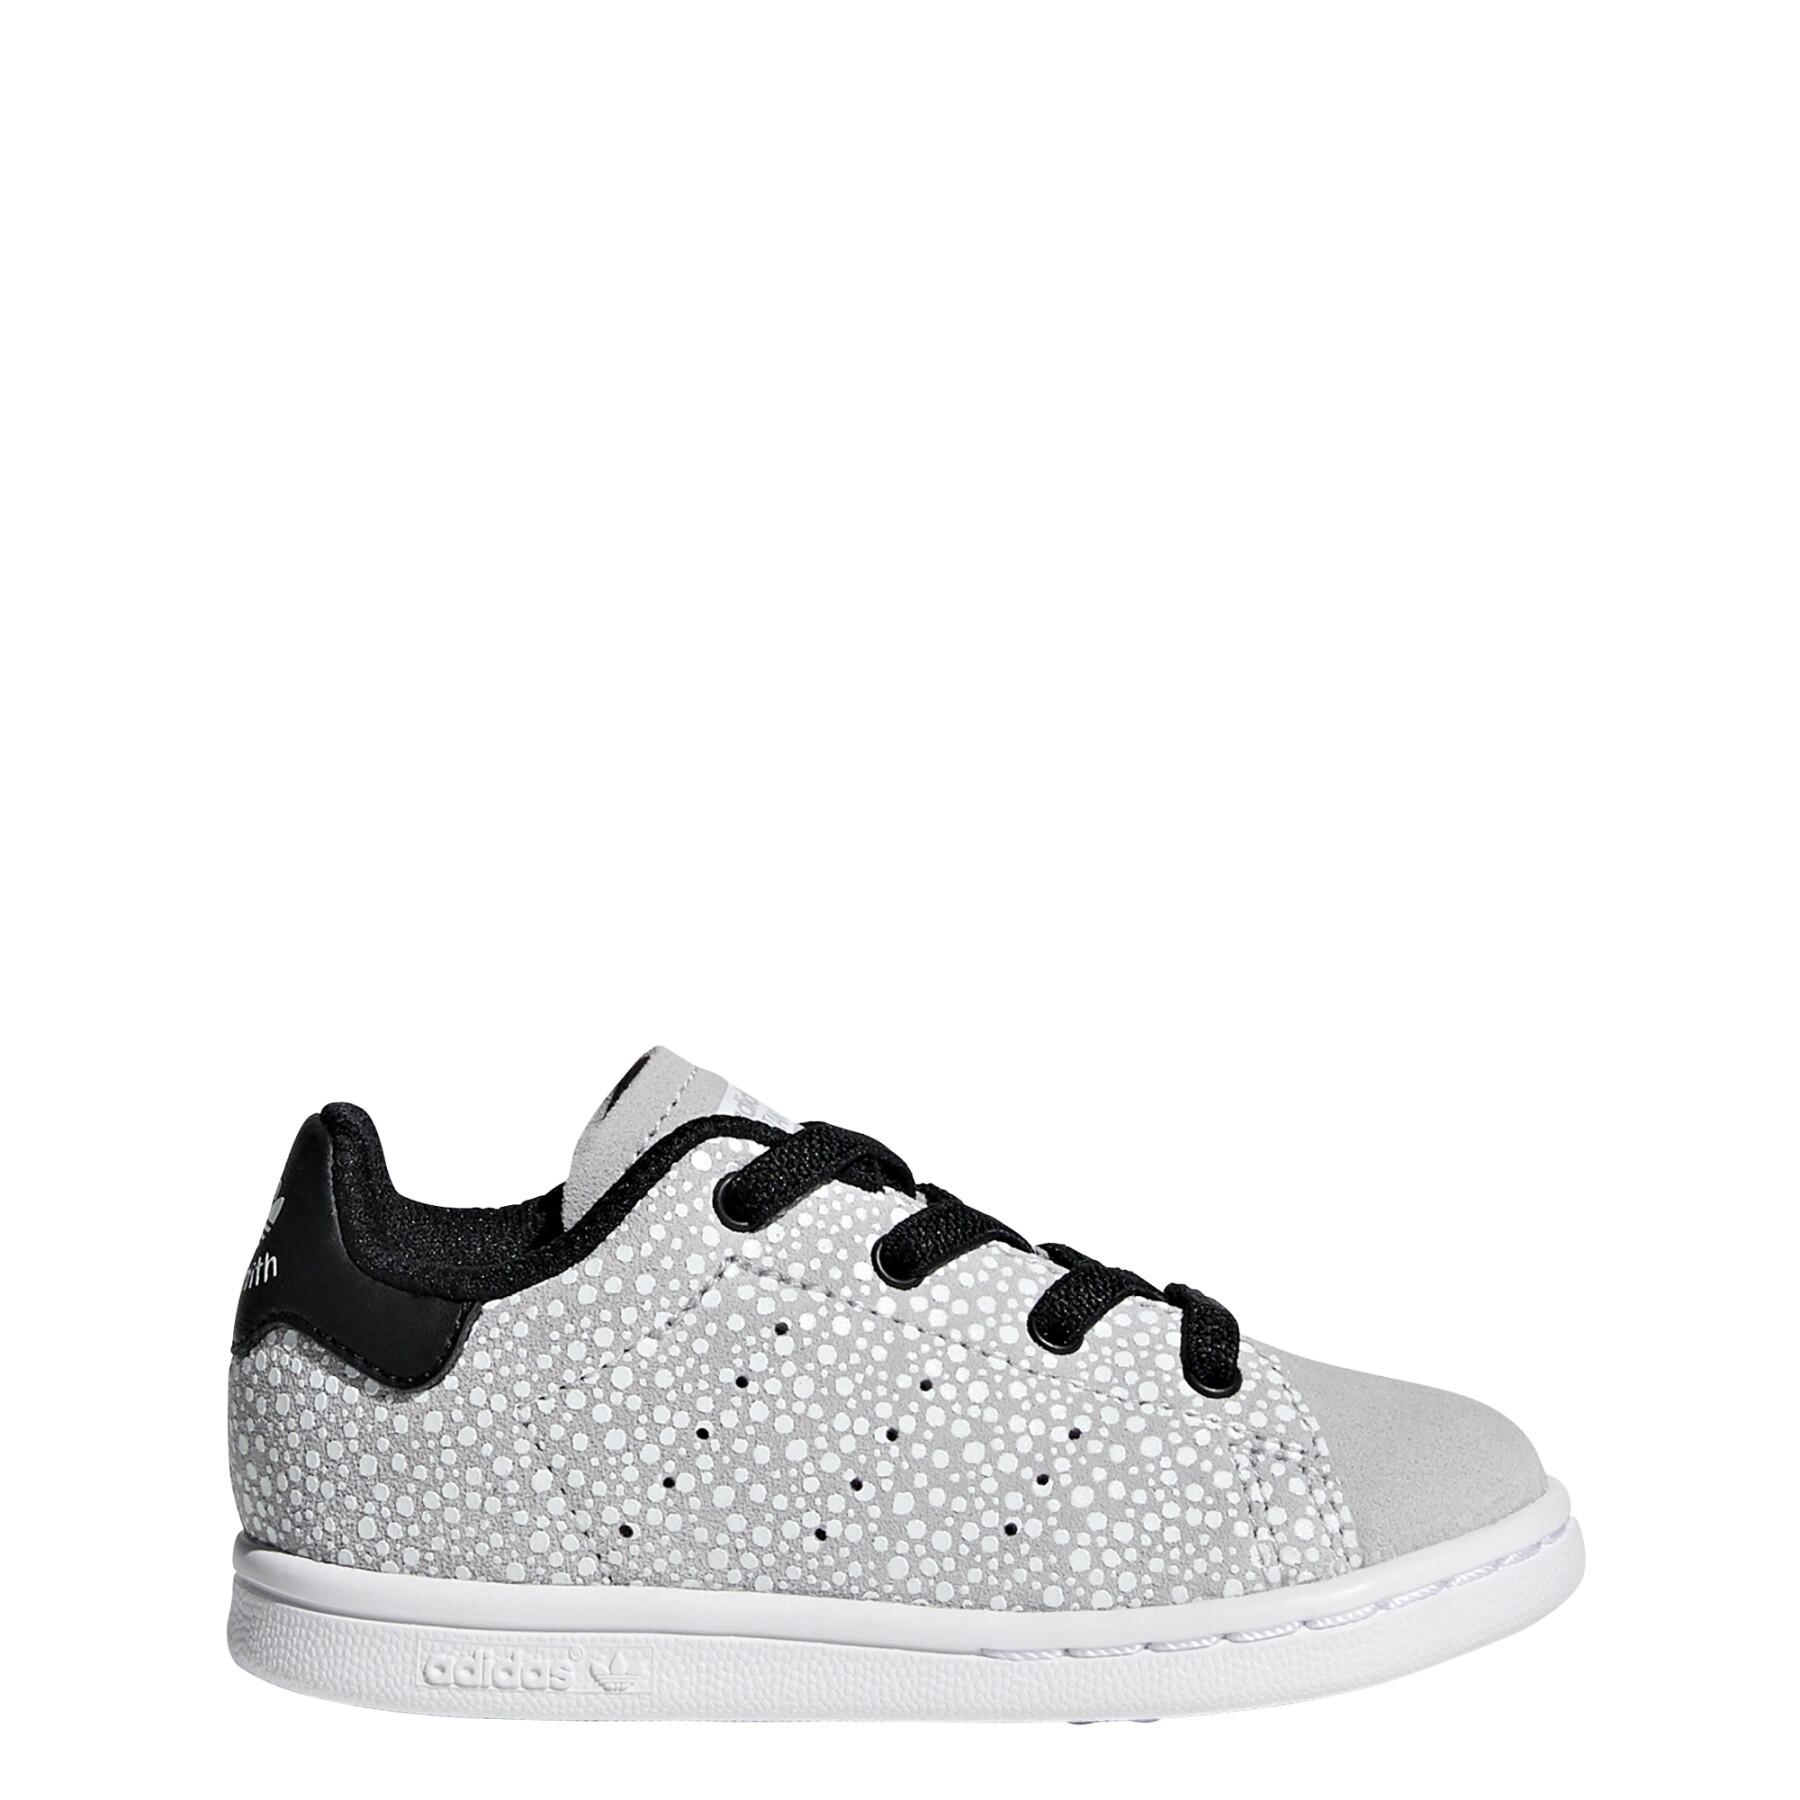 exception Morgue manly adidas Stan Smith Baby Sneakers